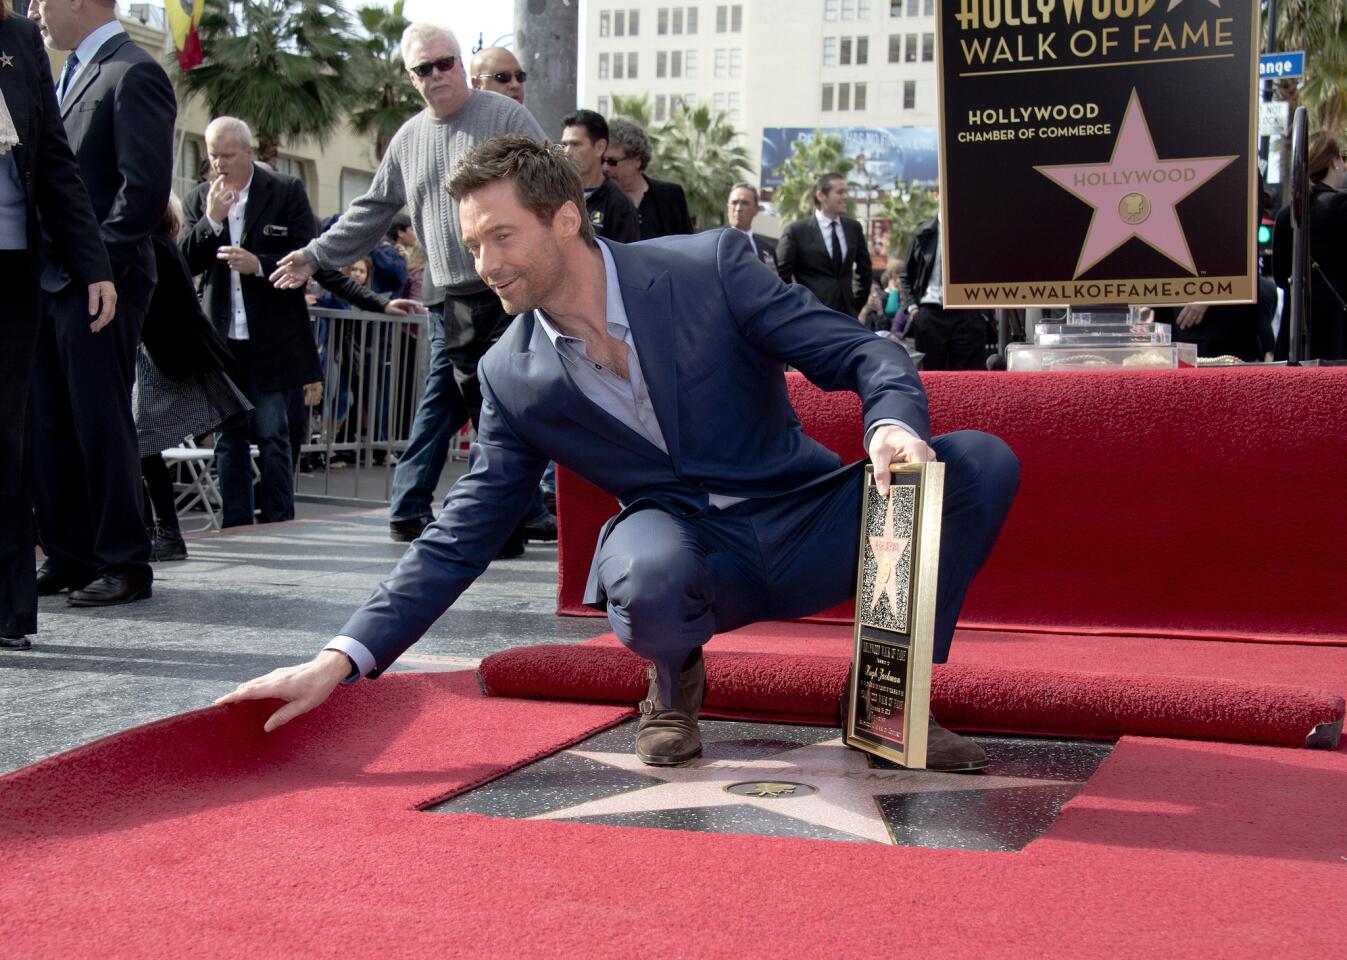 Hugh Jackman got his star on Hollywood's Walk of Fame on Thursday, introduced by Jay Leno and supported by his "Les Miserables" costars Anne Hathaway and Amanda Seyfried. "I believe this is the 2,487th star on the Walk of Fame," Jackman told the crowd, "however, apart from Lassie, I'm the only one who's gotten it for playing the same character in 15 movies." Full story: Hugh Jackman gets his star on Hollywood Walk of Fame | INTERACTIVE: Hollywood Star Walk